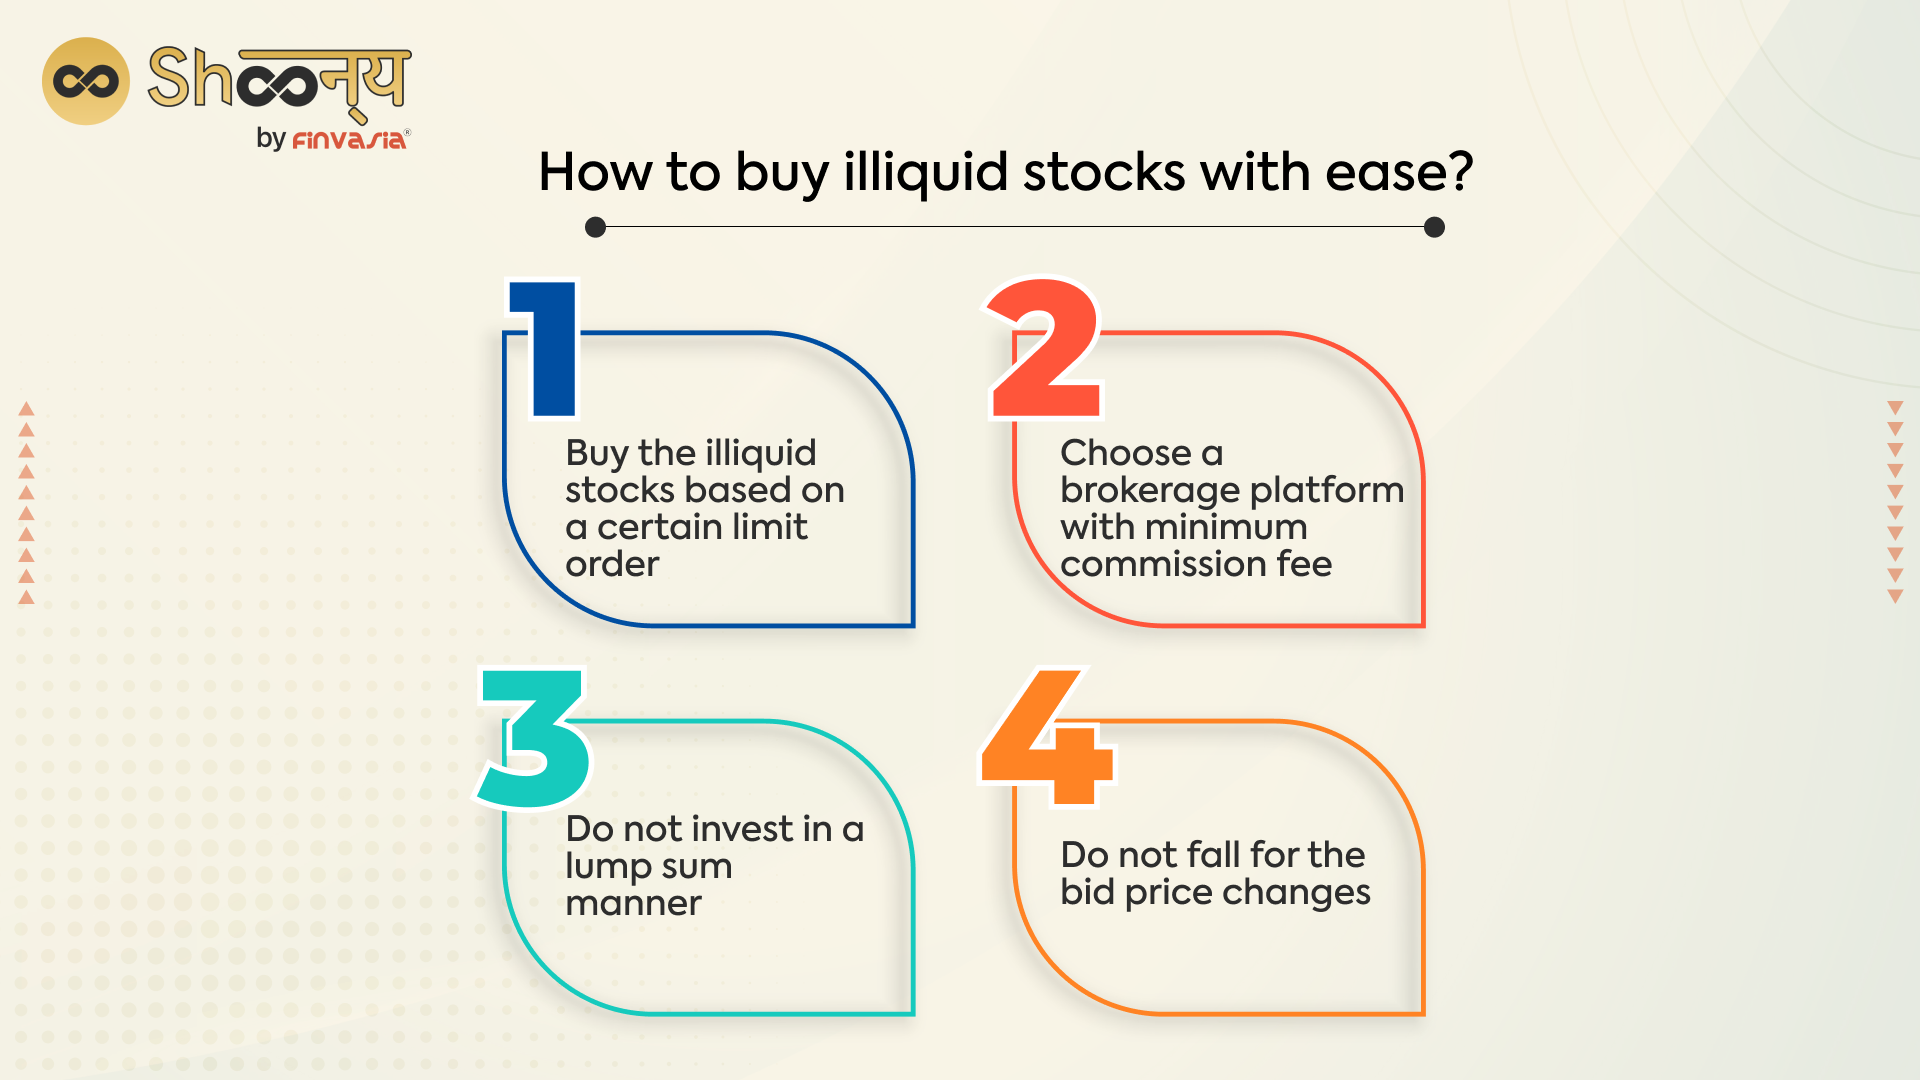 How to buy illiquid stocks with ease